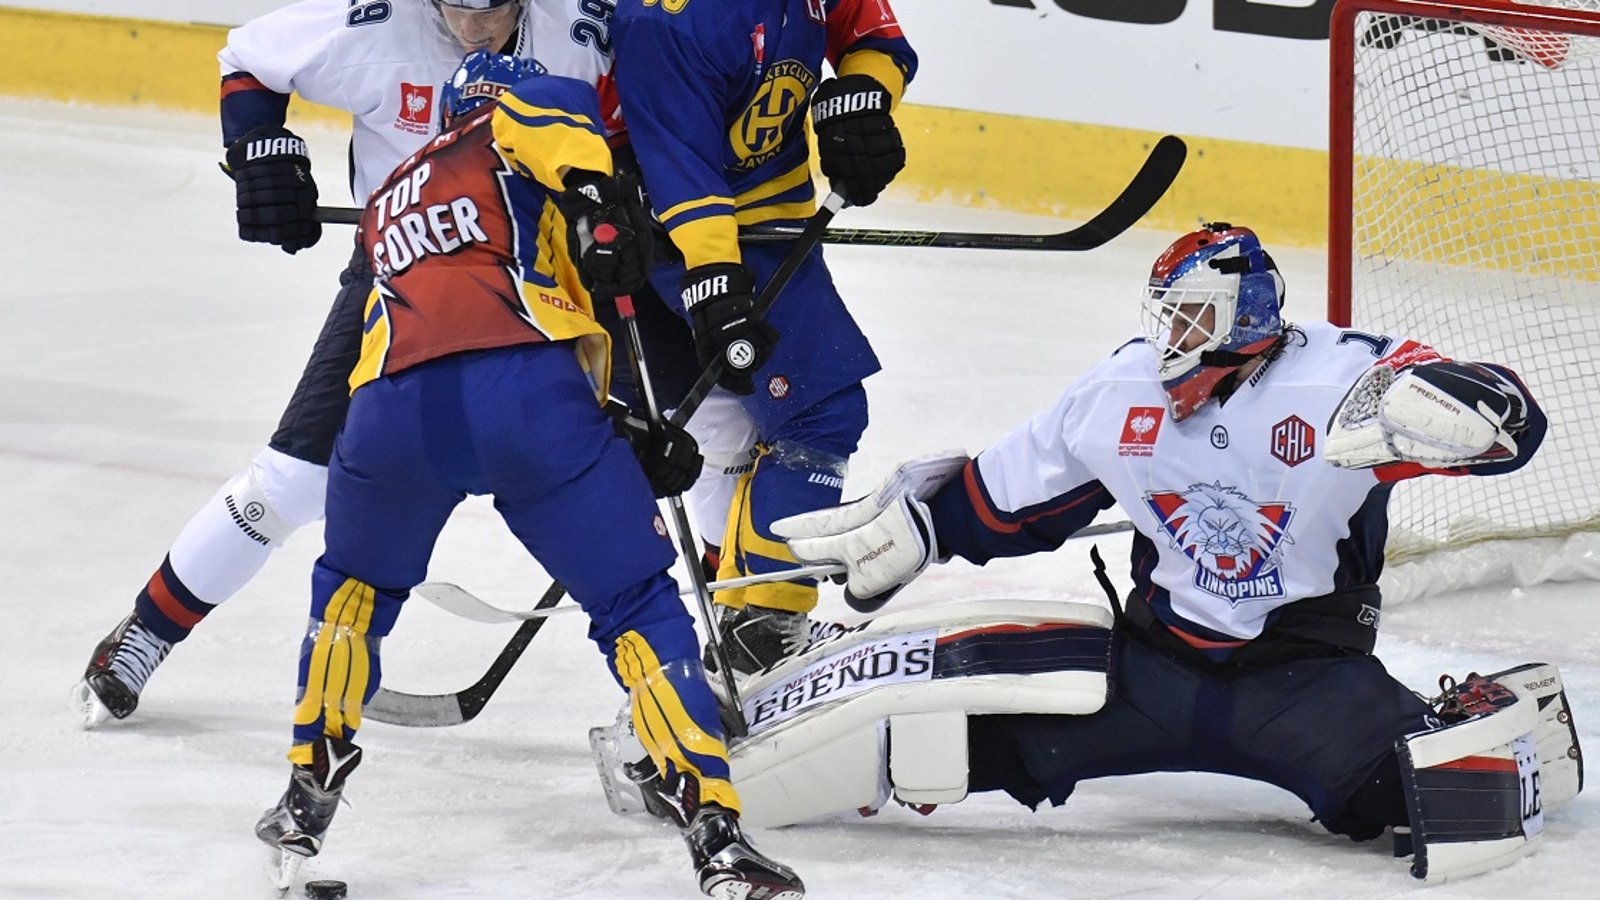 One of Sweden's top goalies has signed with an NHL team.